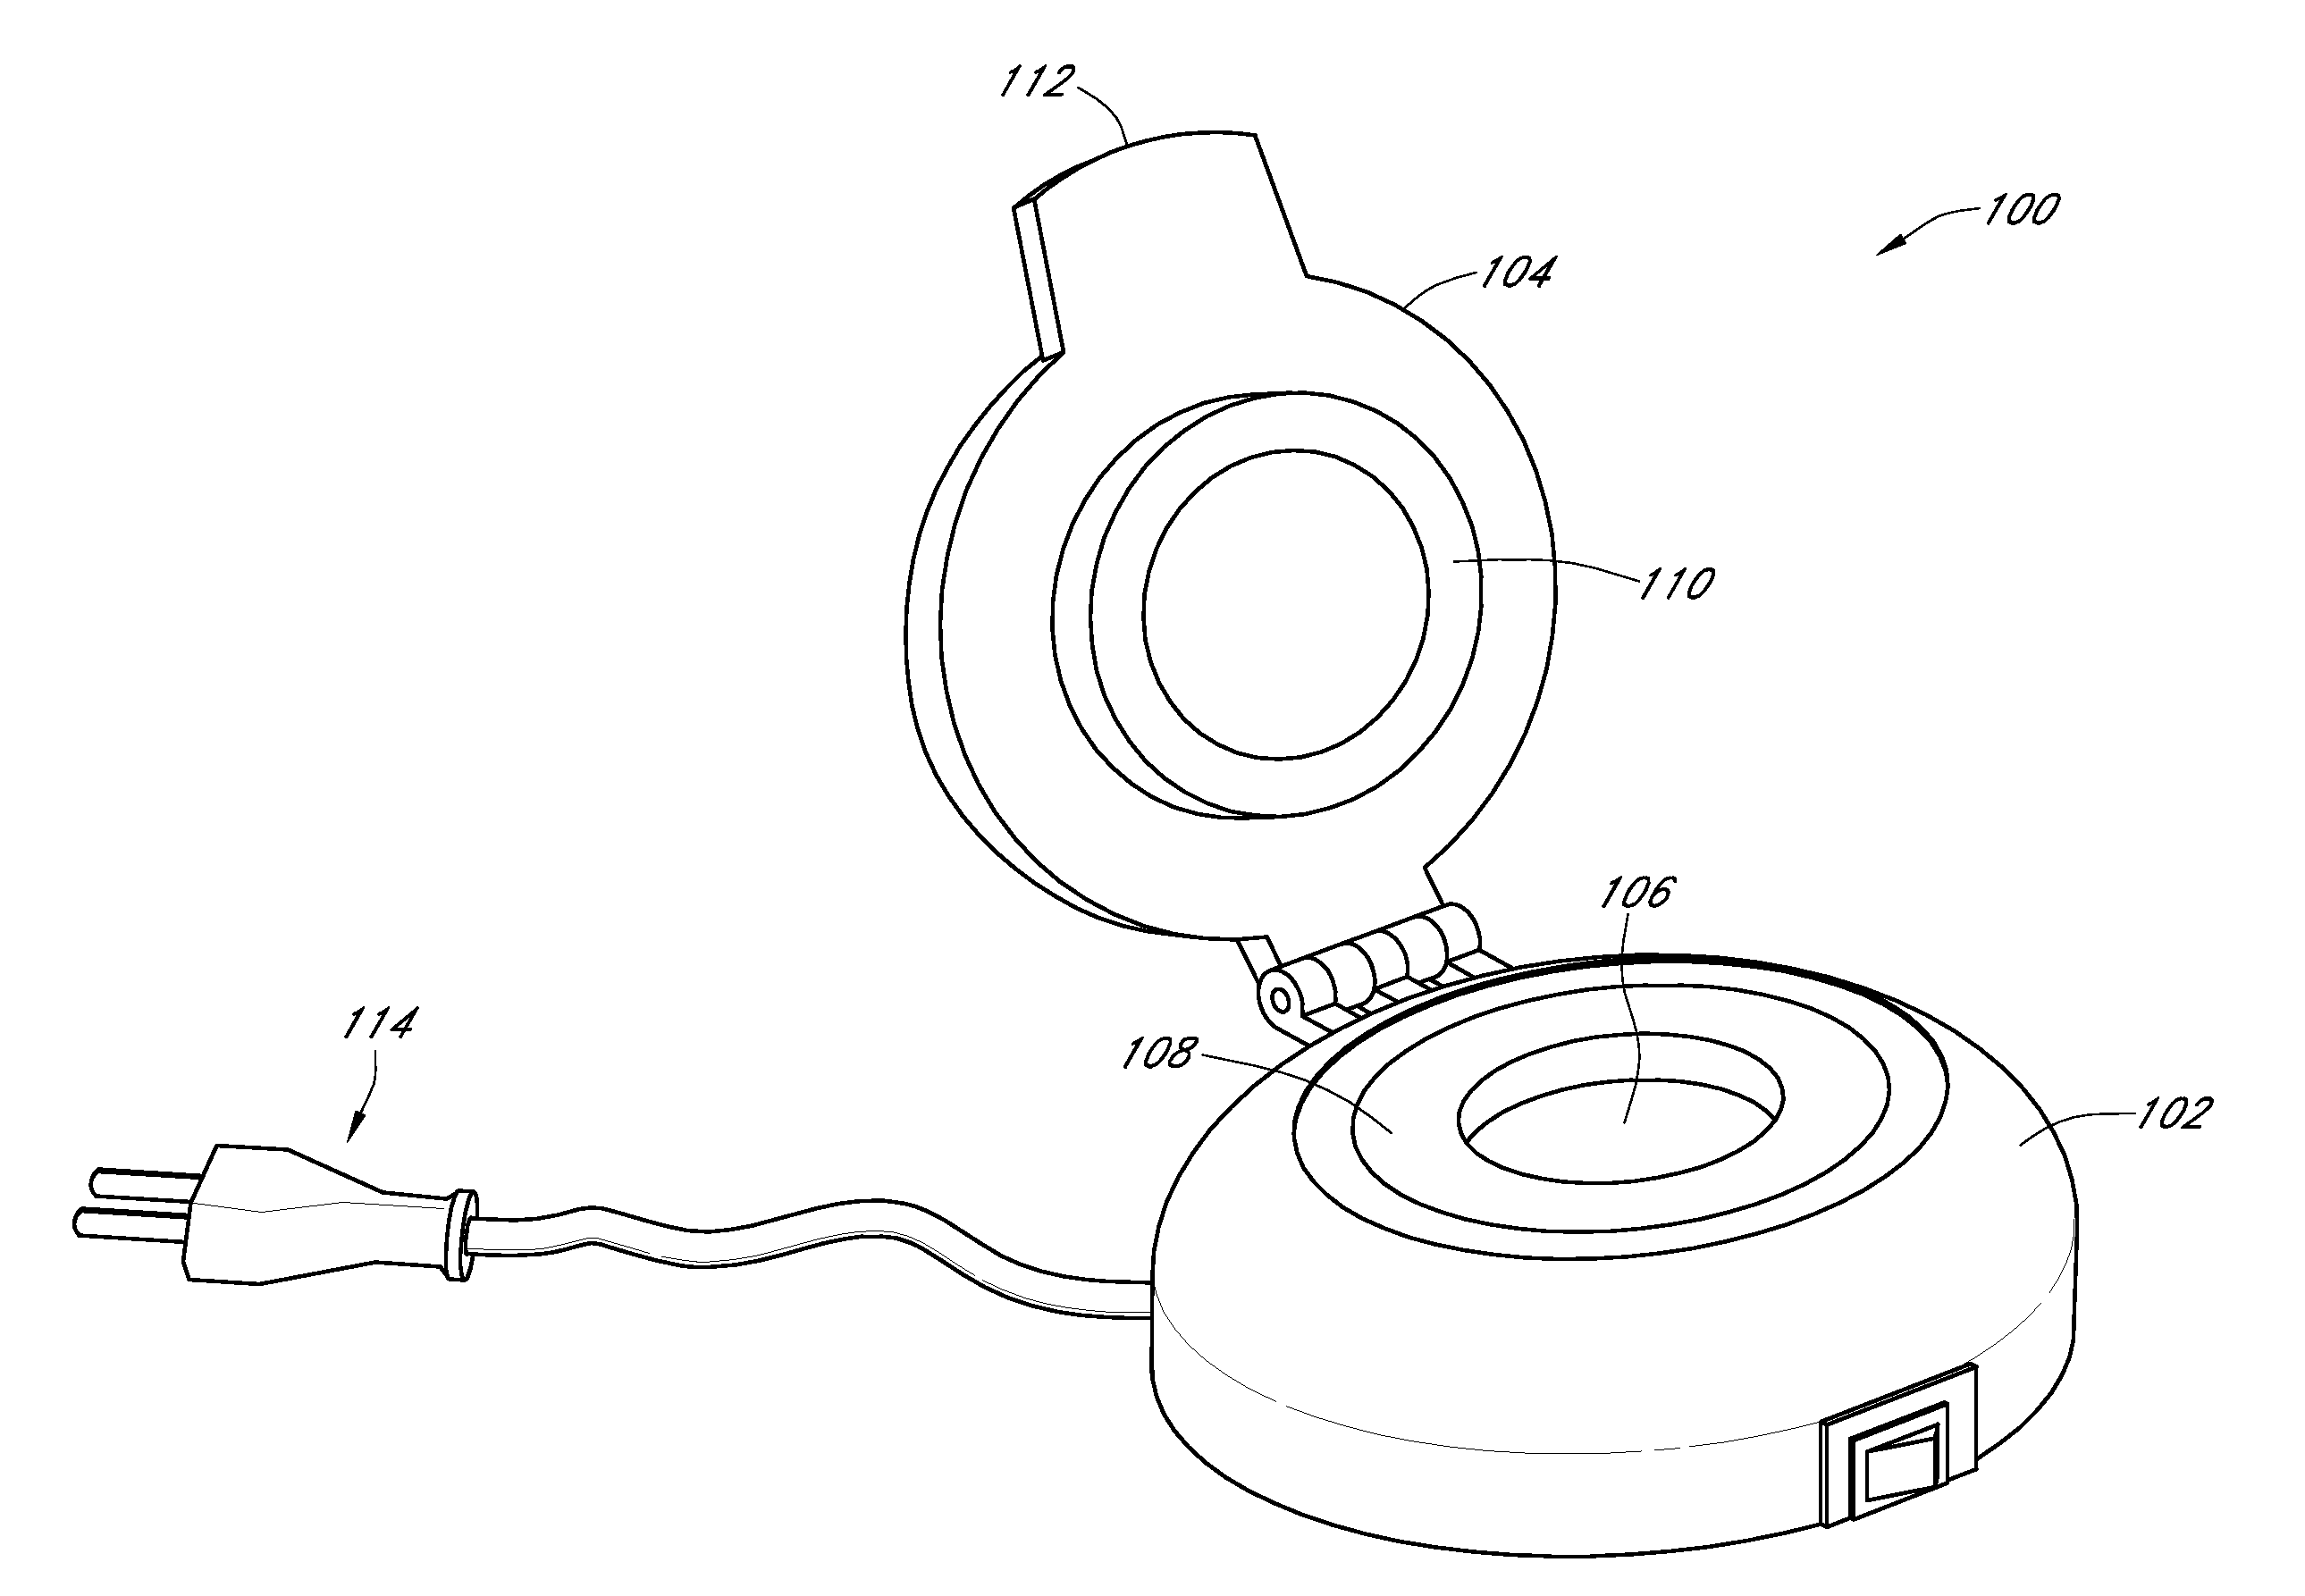 Systems and methods for forming pre-packaged brewing material